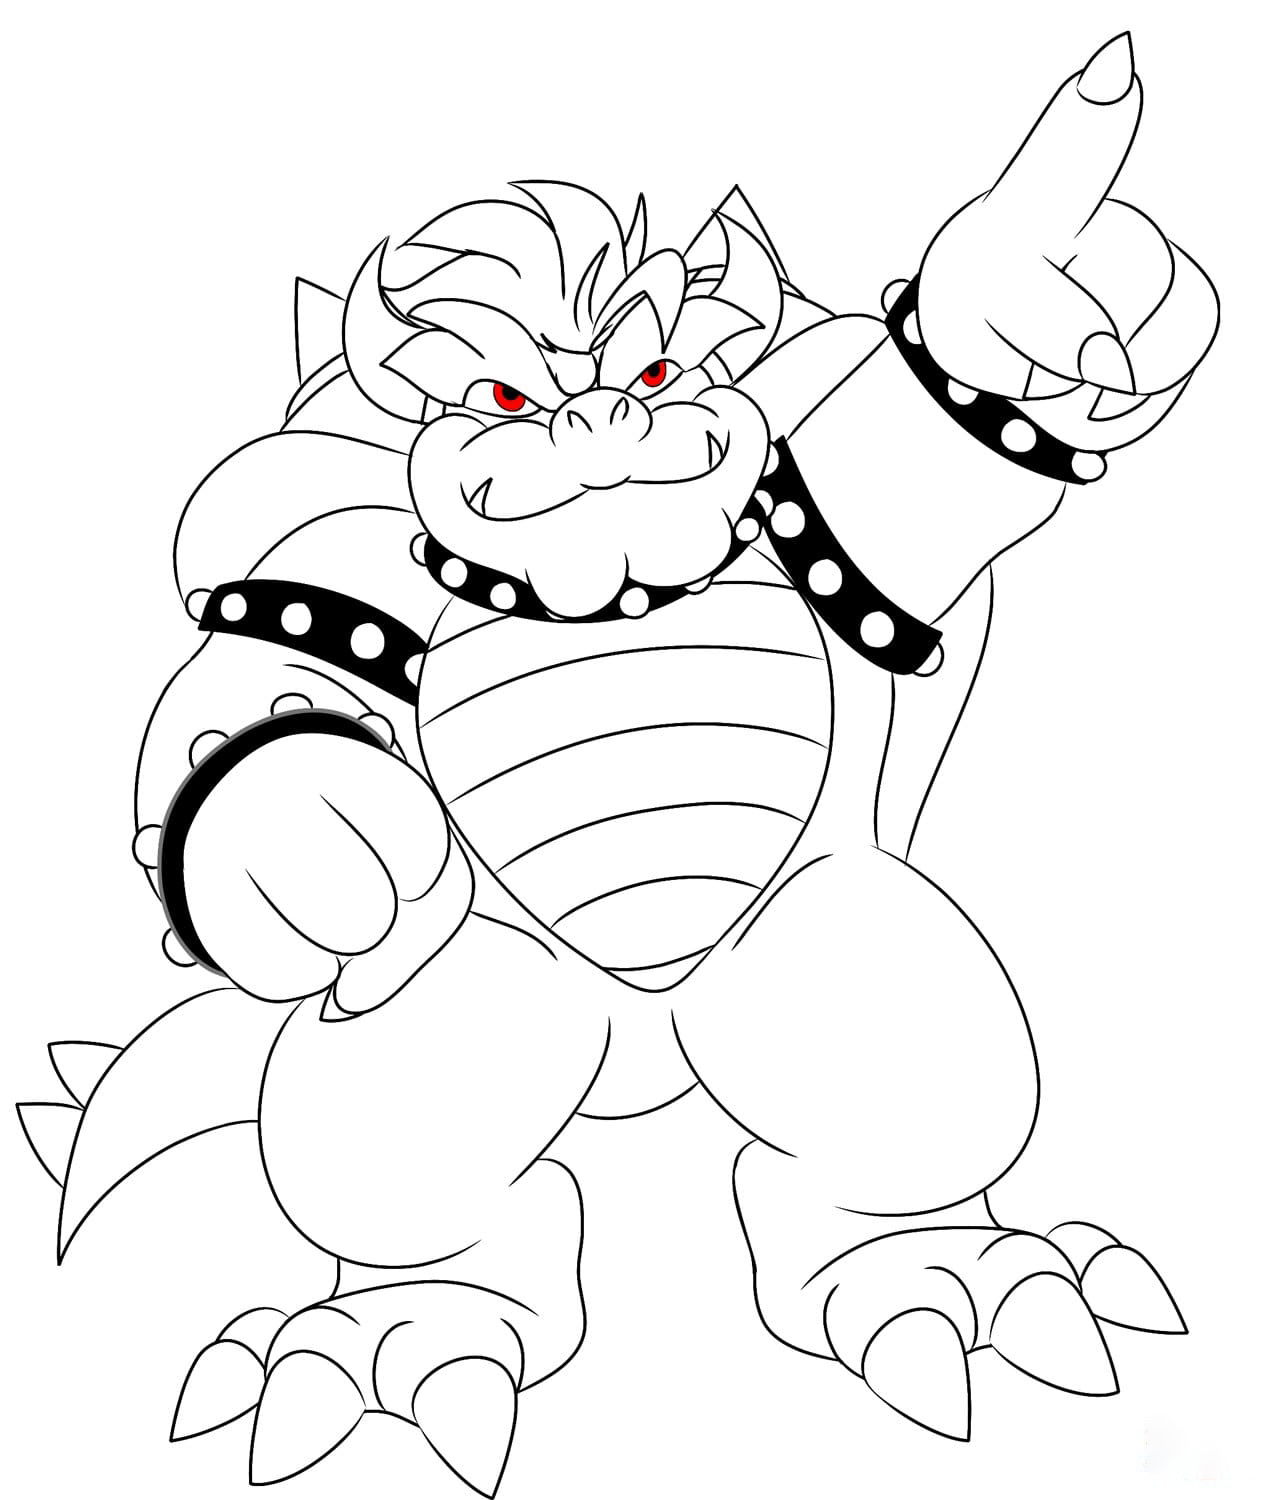 Bowser is pointing something Coloring Pages